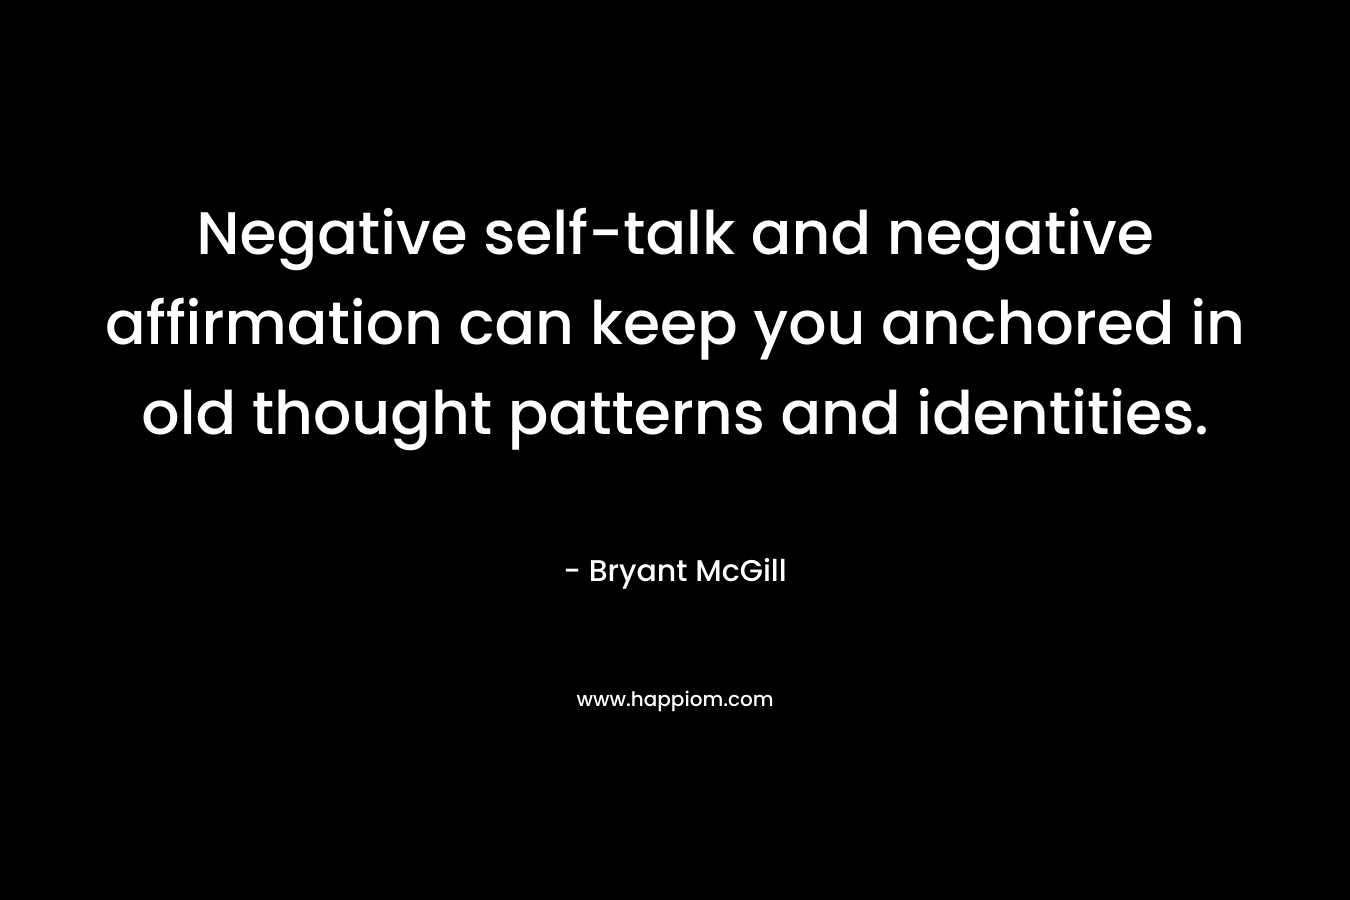 Negative self-talk and negative affirmation can keep you anchored in old thought patterns and identities. – Bryant McGill